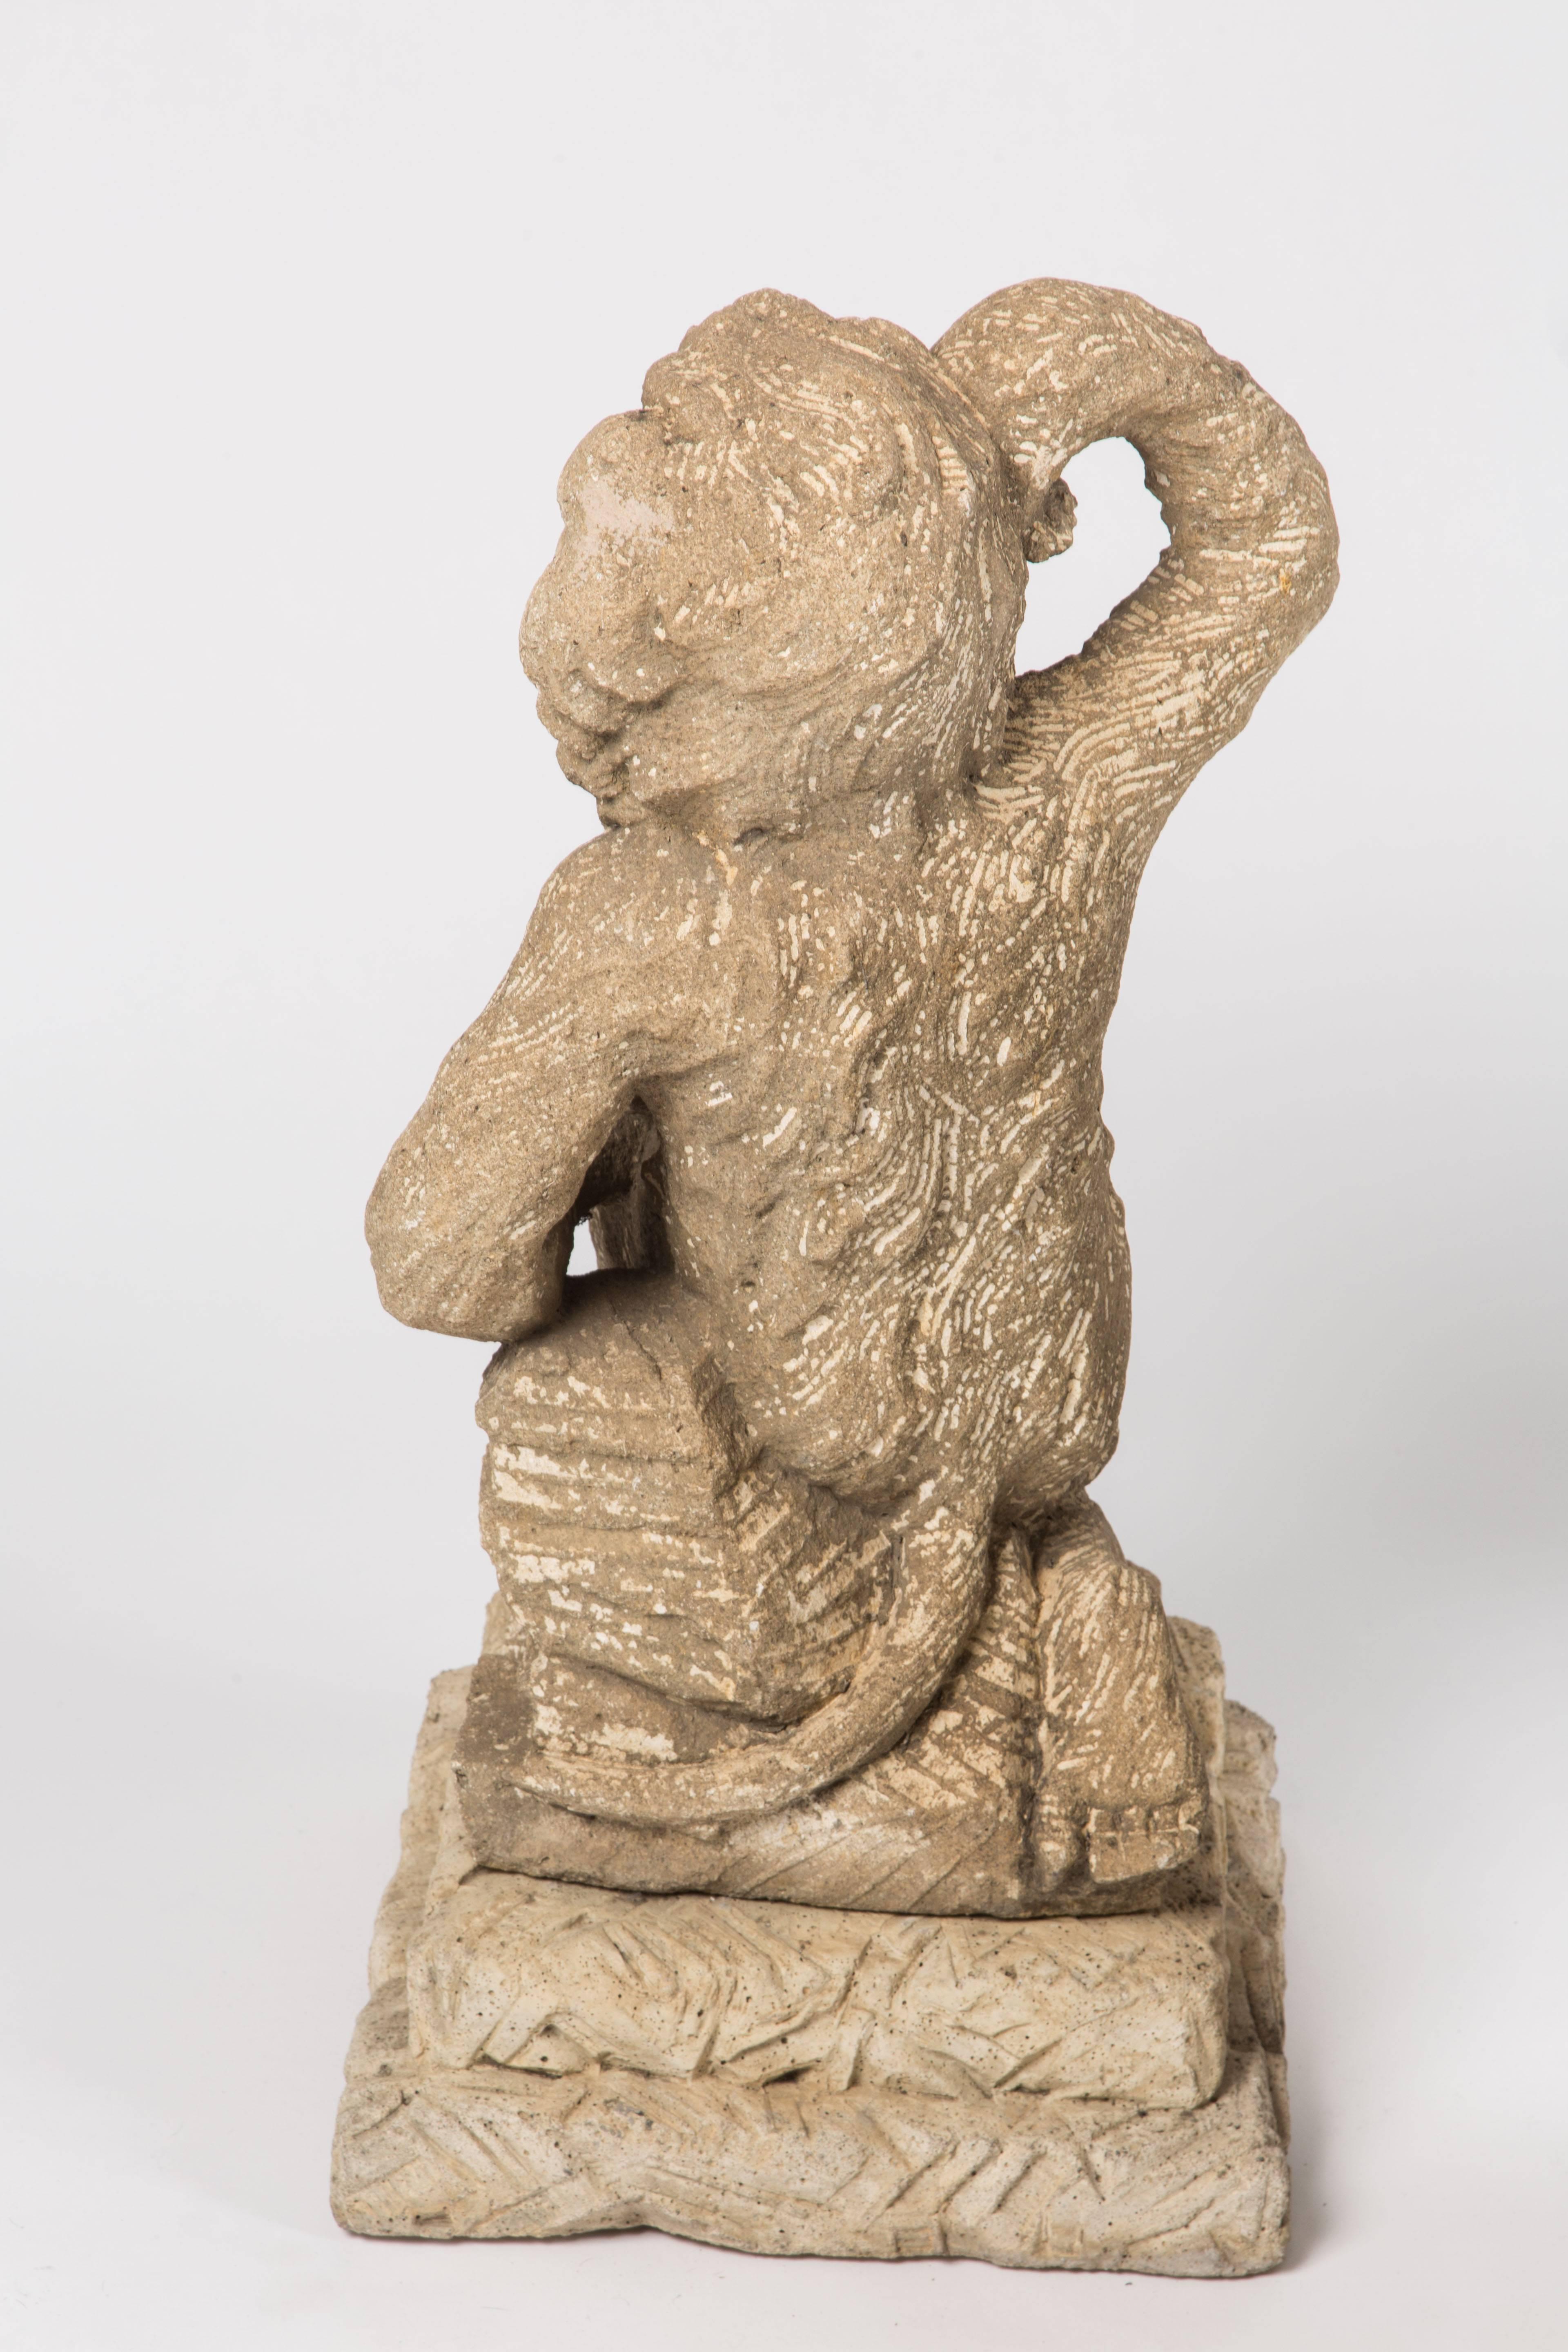 Rococo Magical Carved Stone Monkey Band from the Palm Springs Estate of Jack Warner